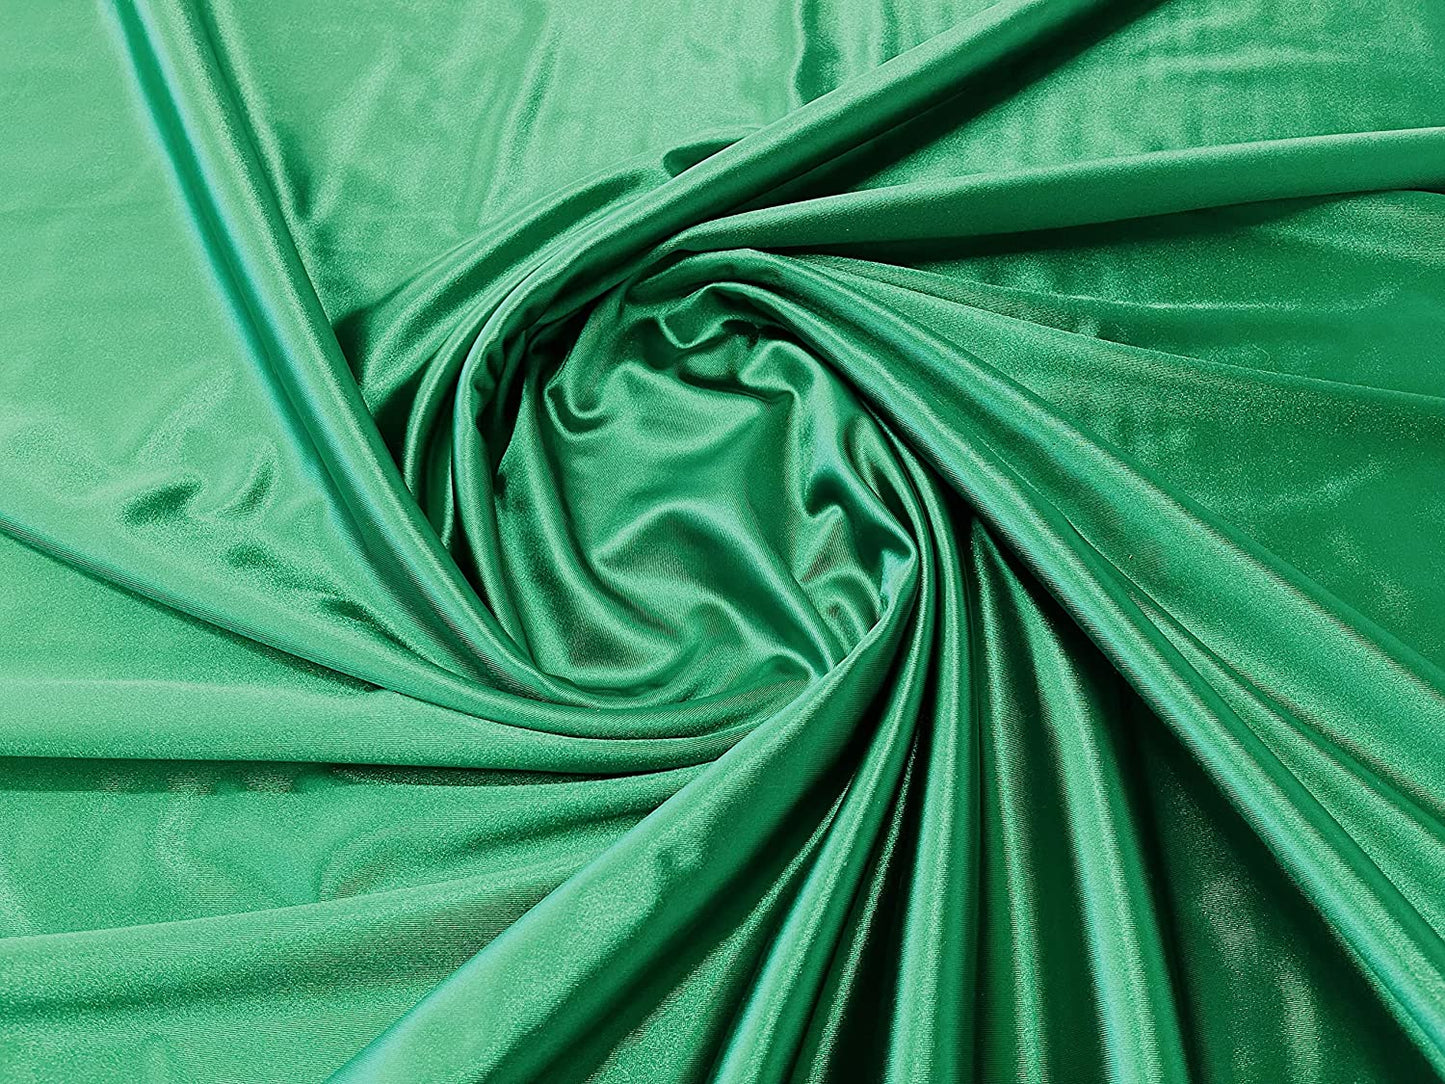 Deluxe Shiny Polyester Spandex Stretch Fabric (1 Yard, Kelly Green)